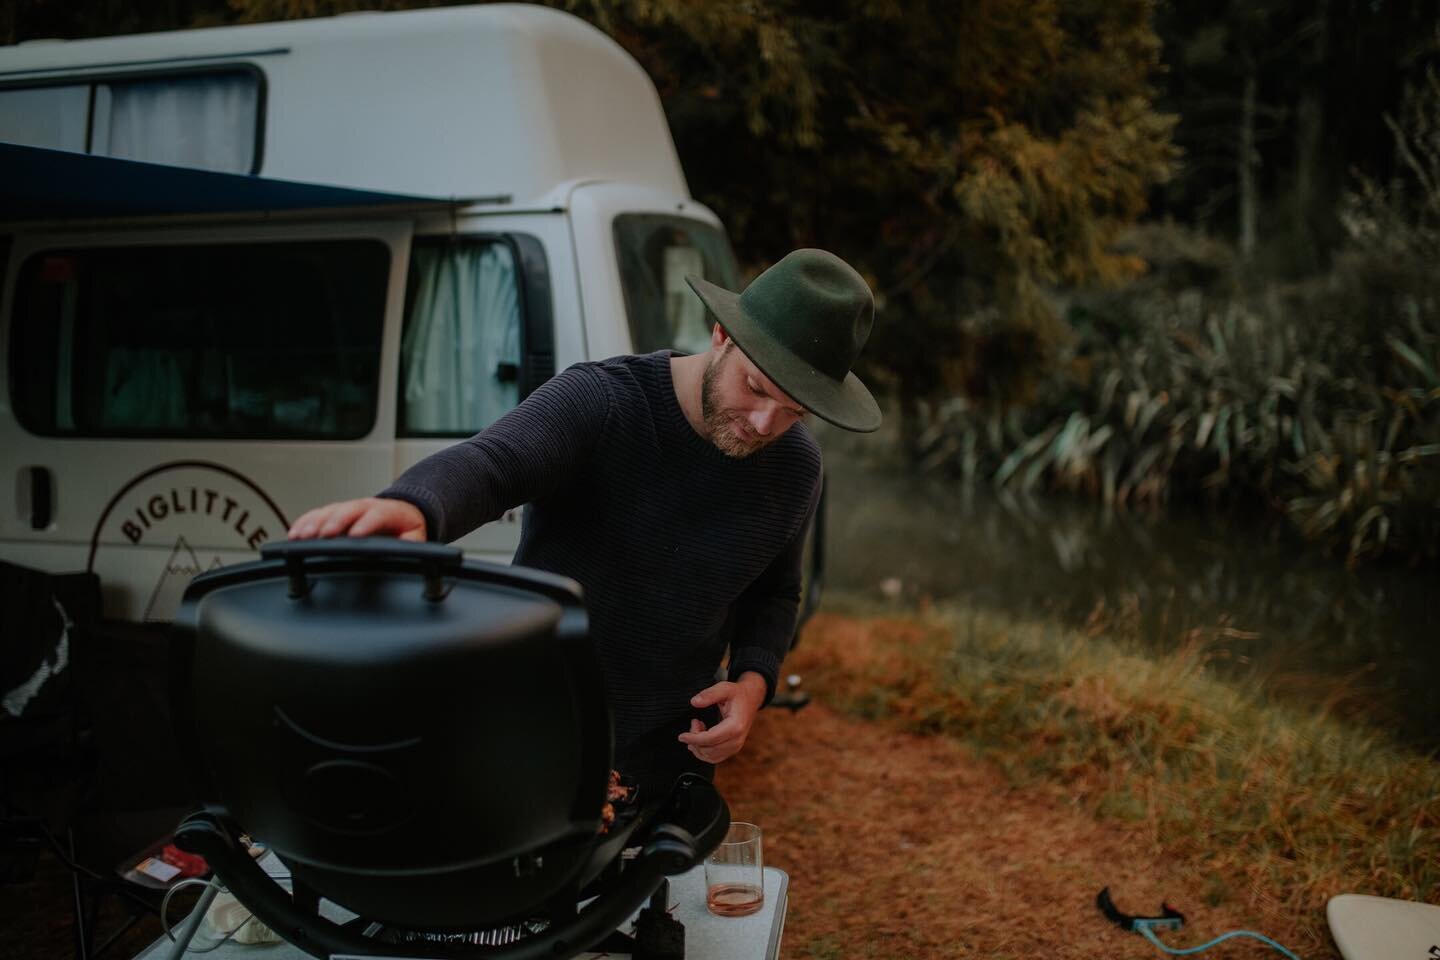 Who takes their @weberbbqausnz wherever they go ? 🙌🏼 there&rsquo;s nothing better 🍗 
.
.
.📷 @amykatephotog 
.
&nbsp;

.
.
.
.
.

&nbsp;
#vanlife #newzealand #travel #roadtrip #nz #adventure #wanderlust #nature #nzmustdo #mountains #travelphotogra